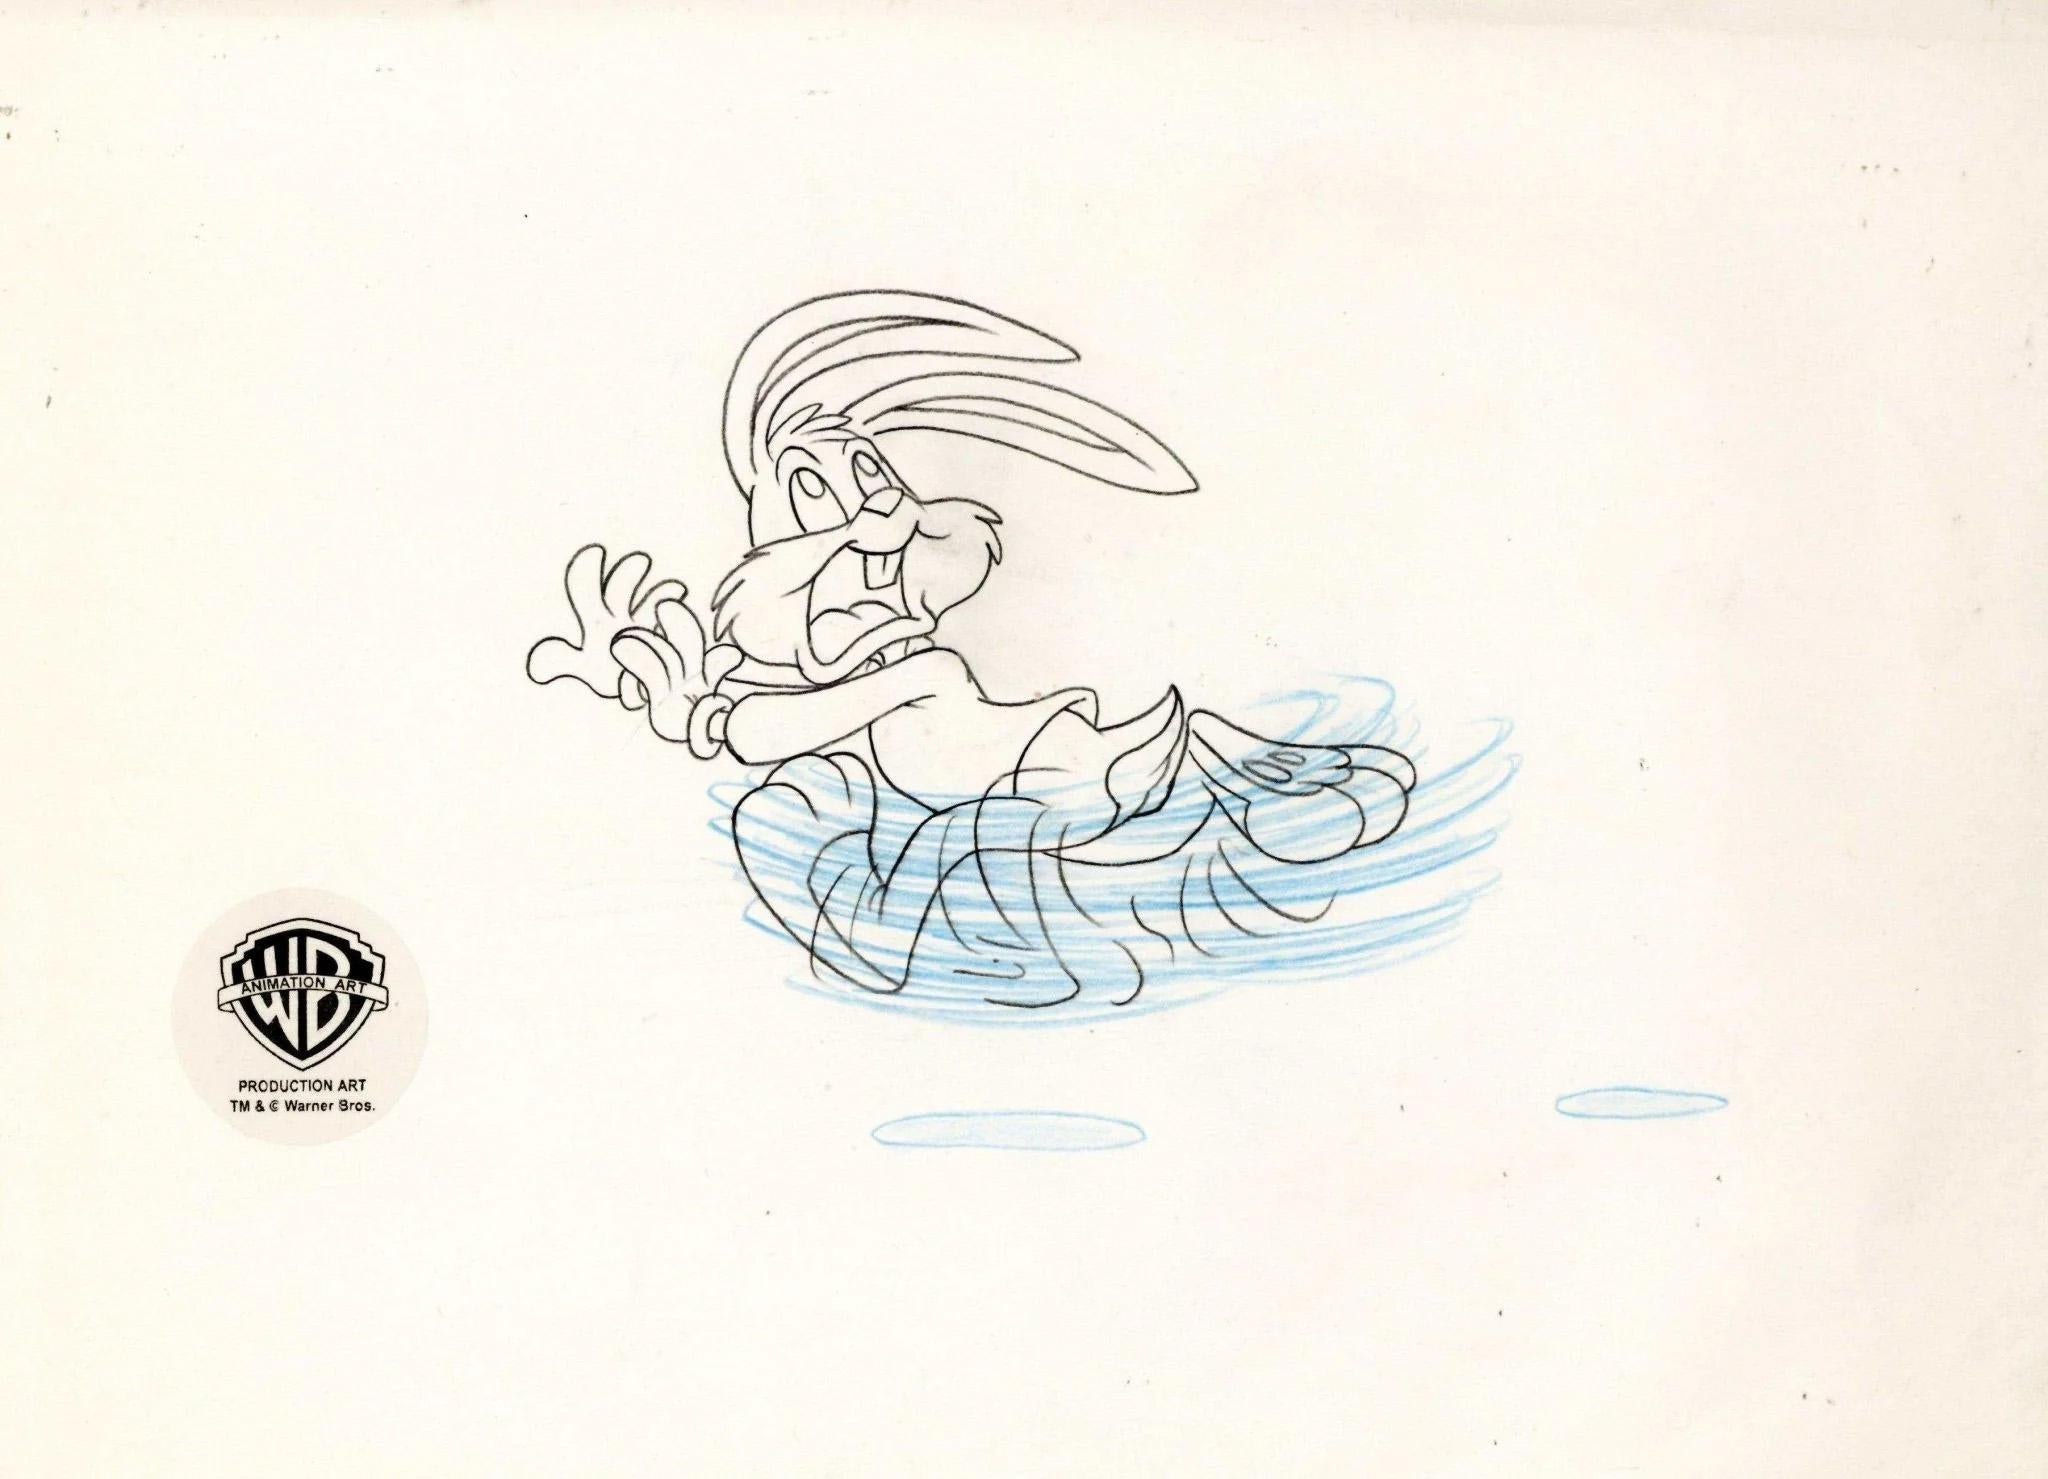 Tiny Toons Original Production Drawing: Buster - Art by Warner Bros. Studio Artists